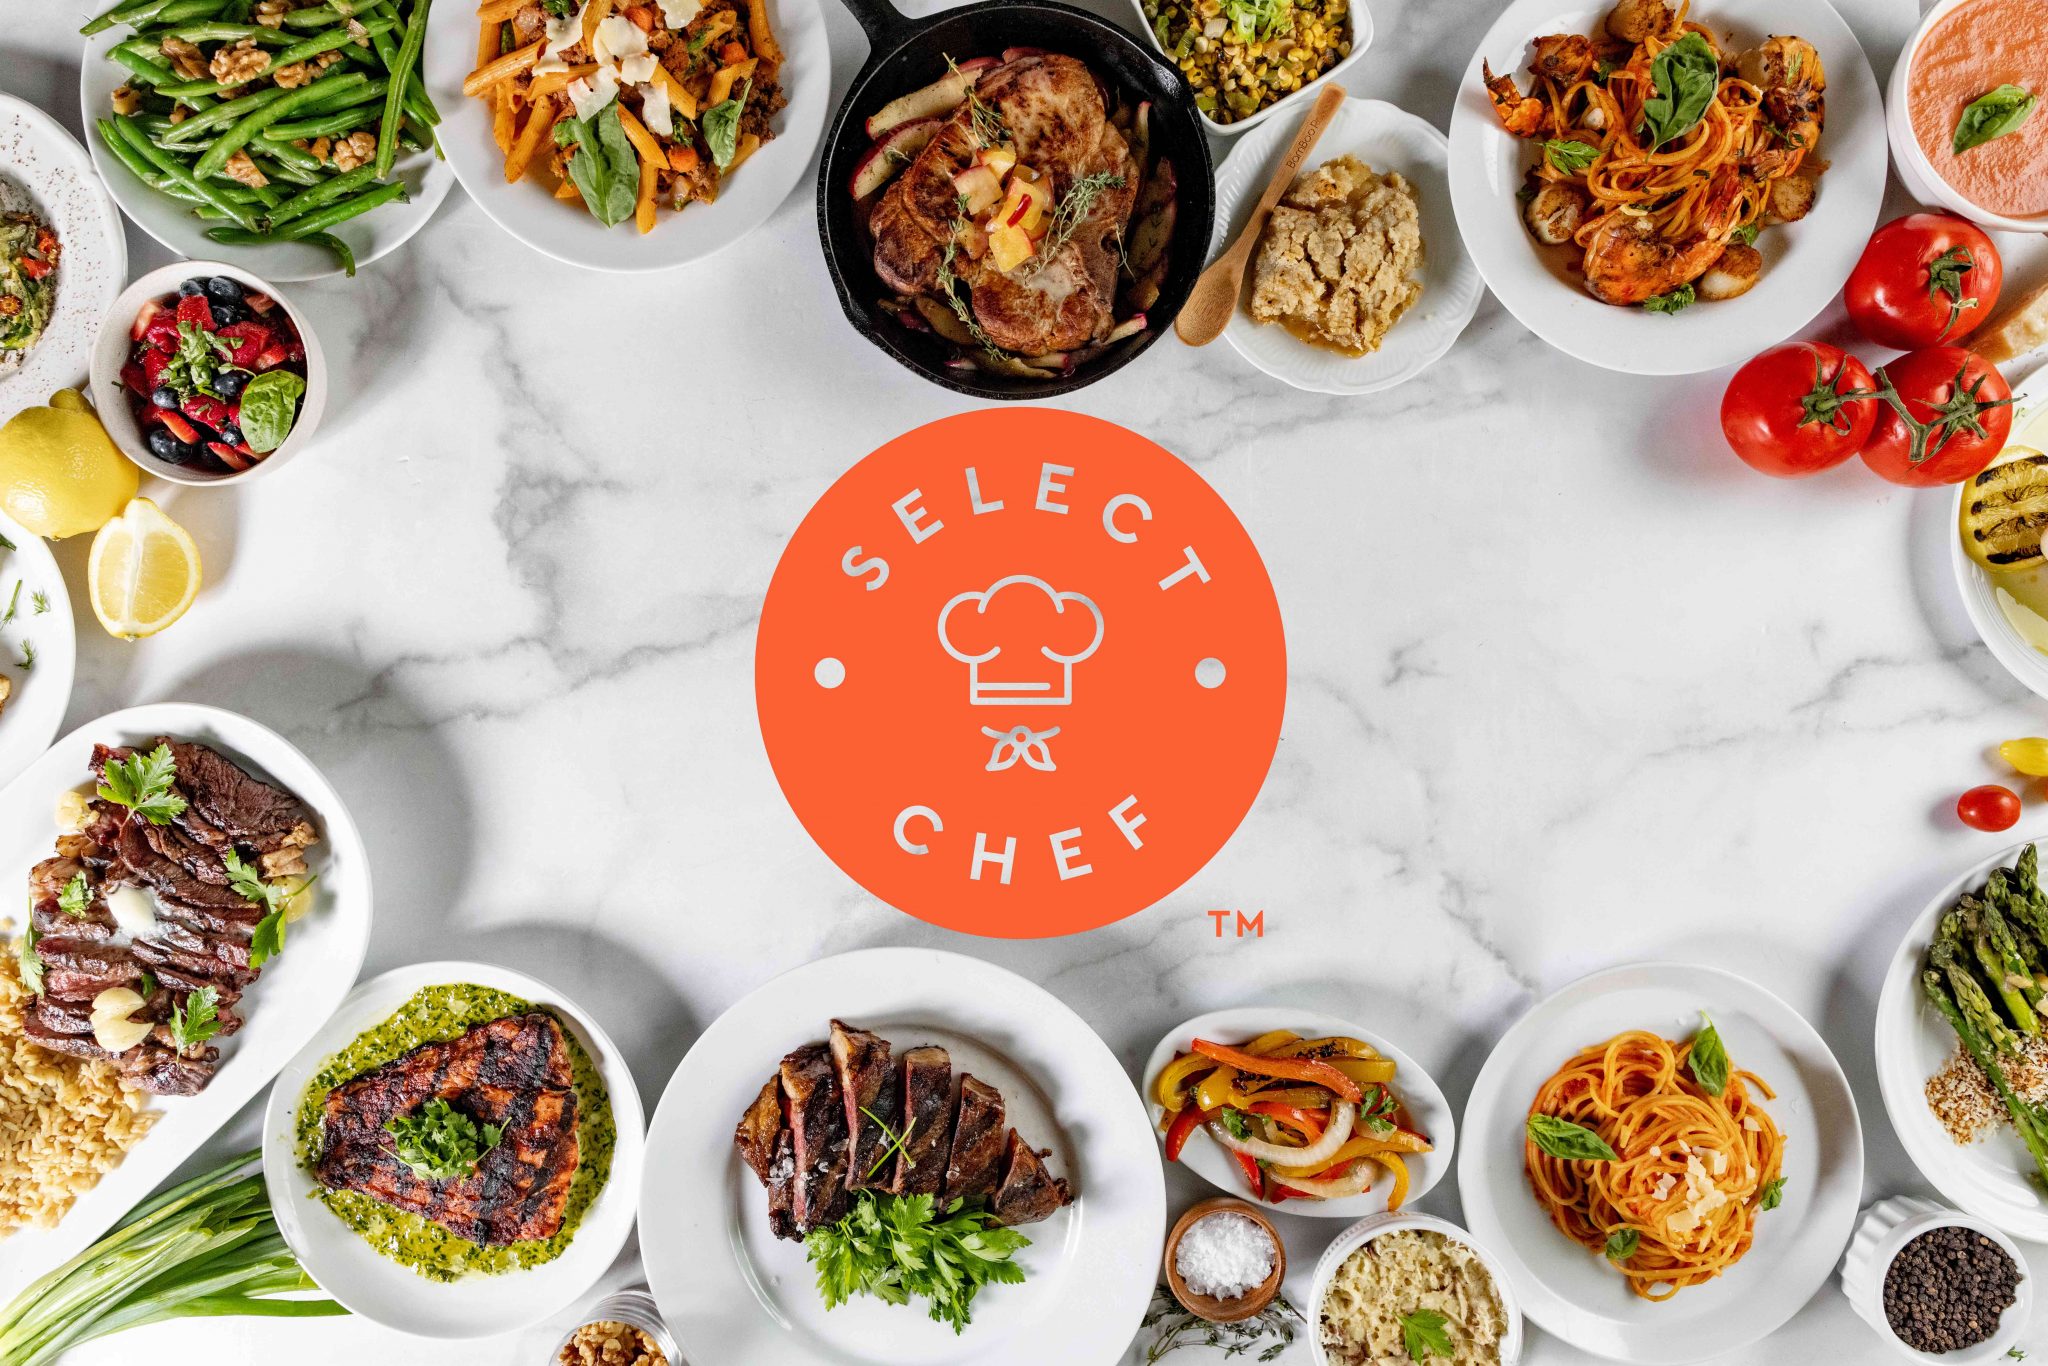 Select Chef About Us Image 2048x1366 